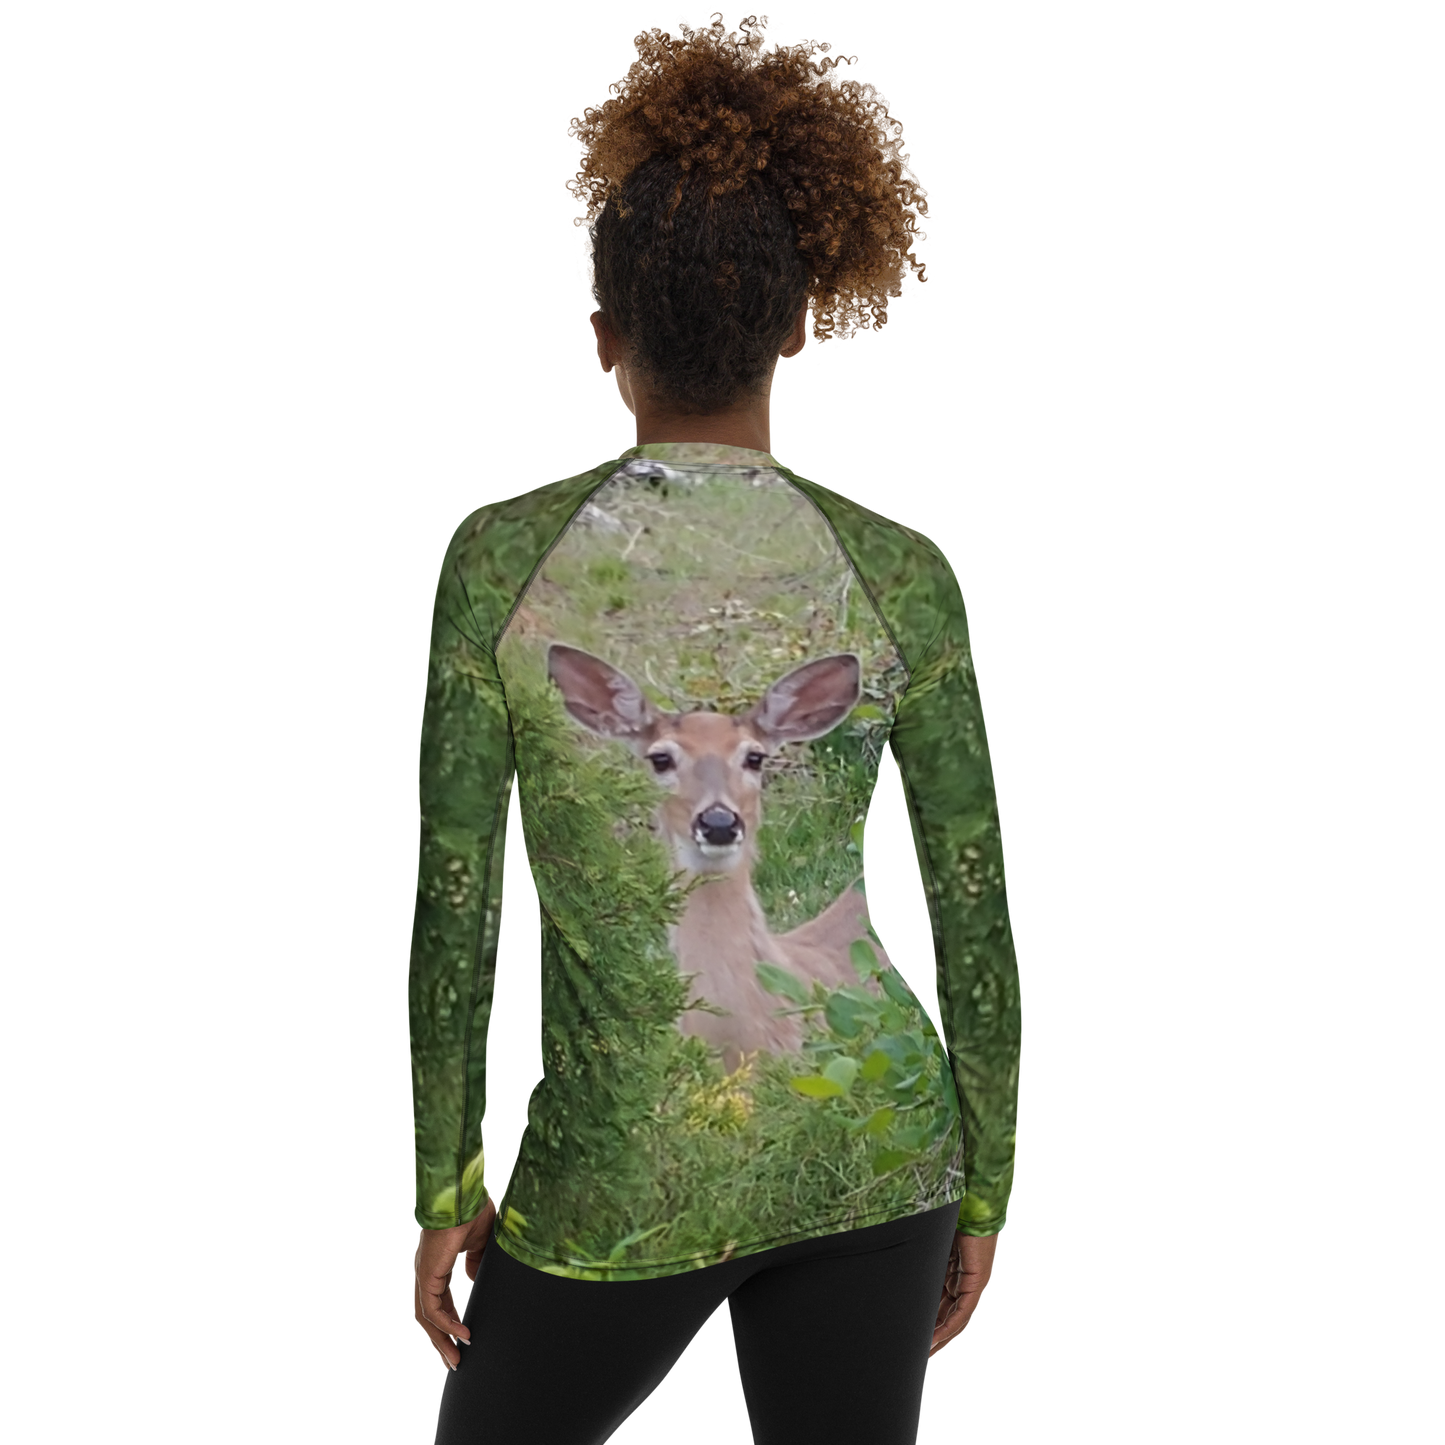 The EARTH LOVE COLLECTION - "A Divine Doe" Design Luxurious Women's Rash Guard, Sun Protective Clothing, Sports & Fitness Clothing